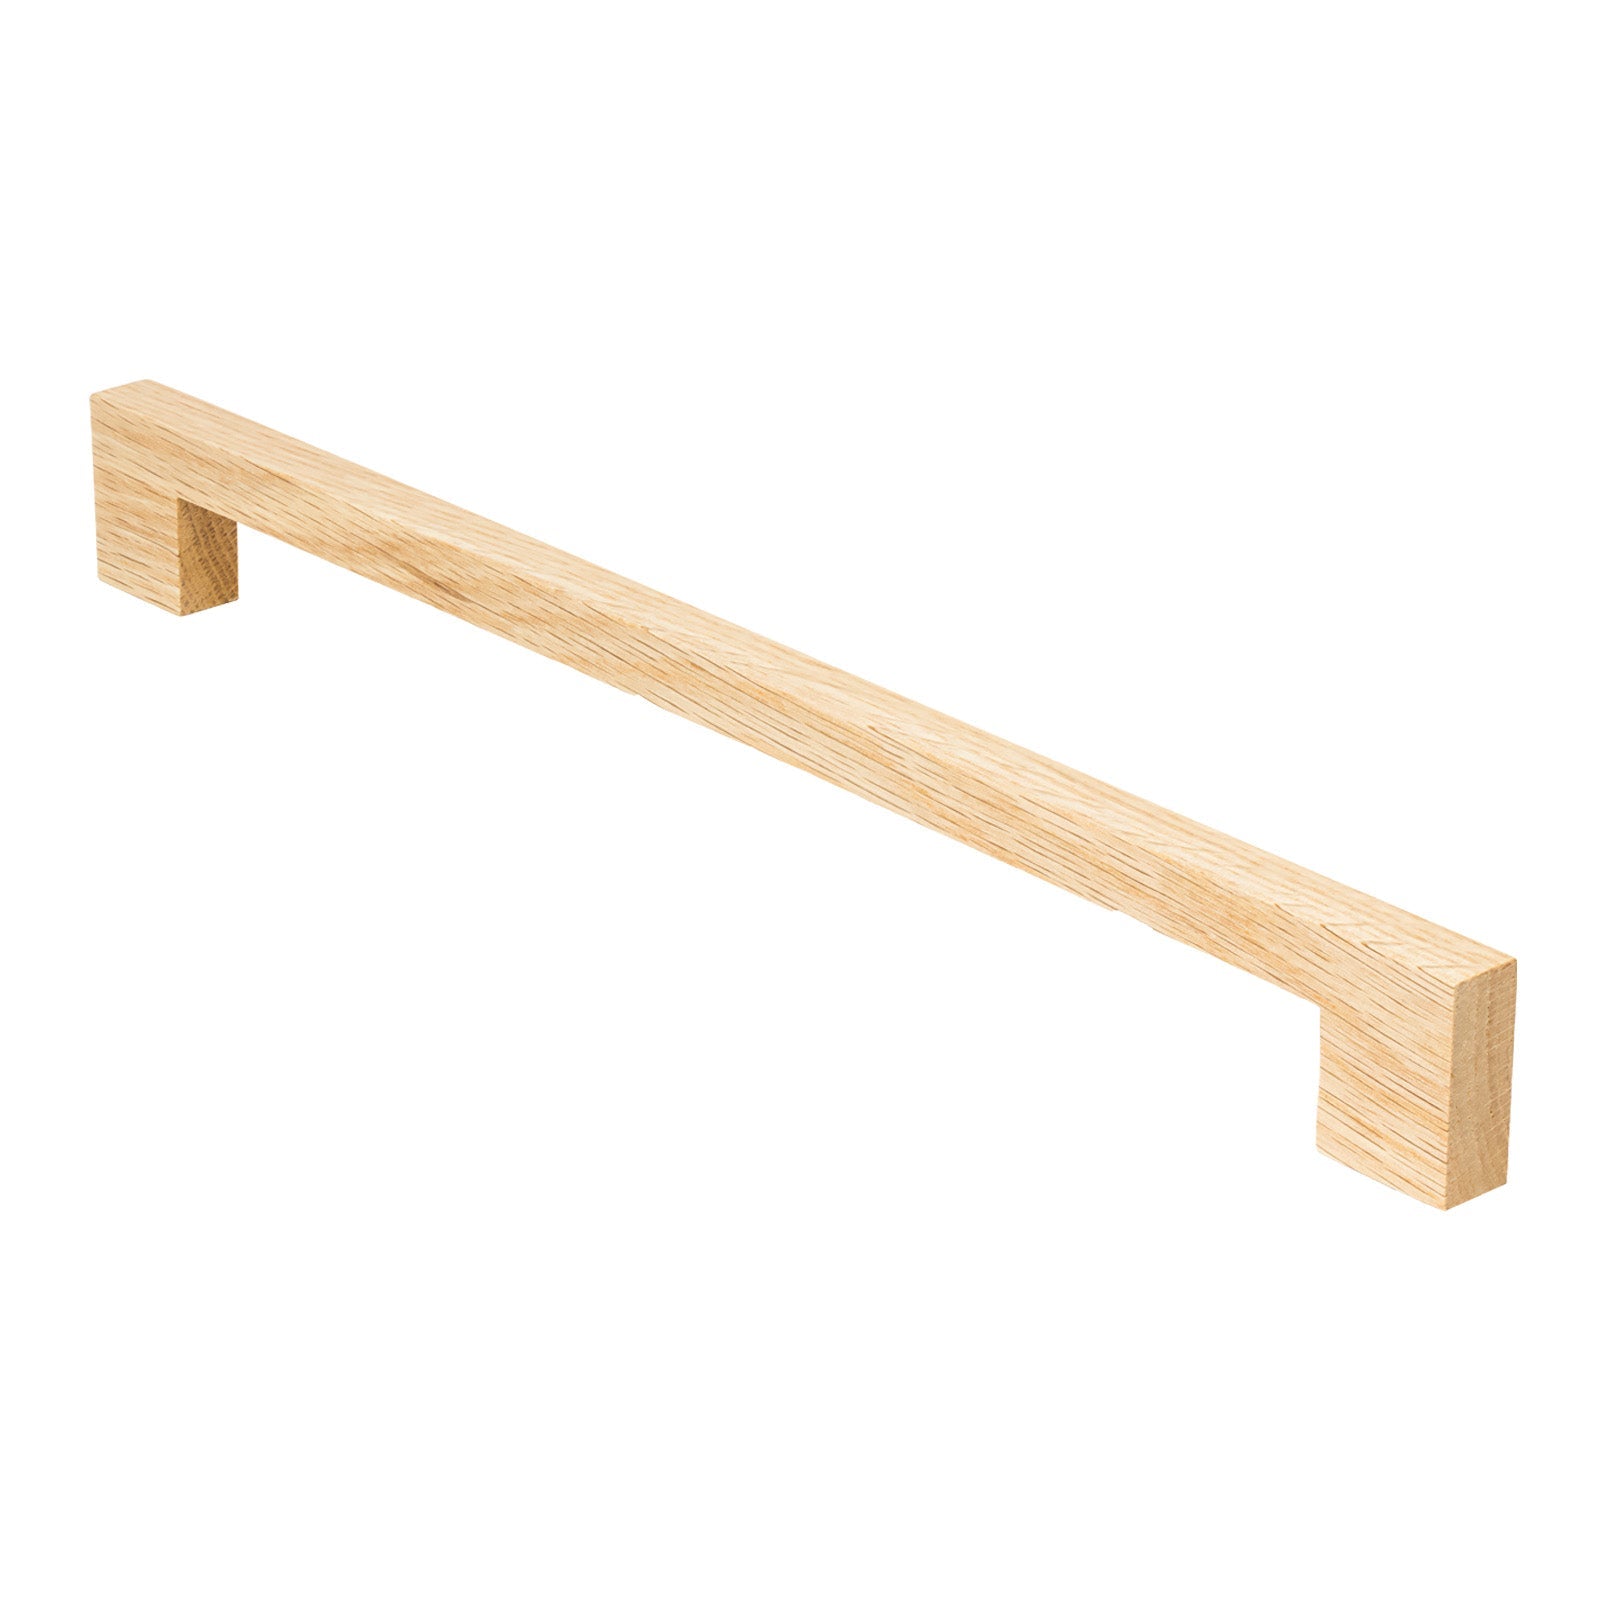 SHOW 288mm Metro Cabinet Pull Handle In Oak Finish